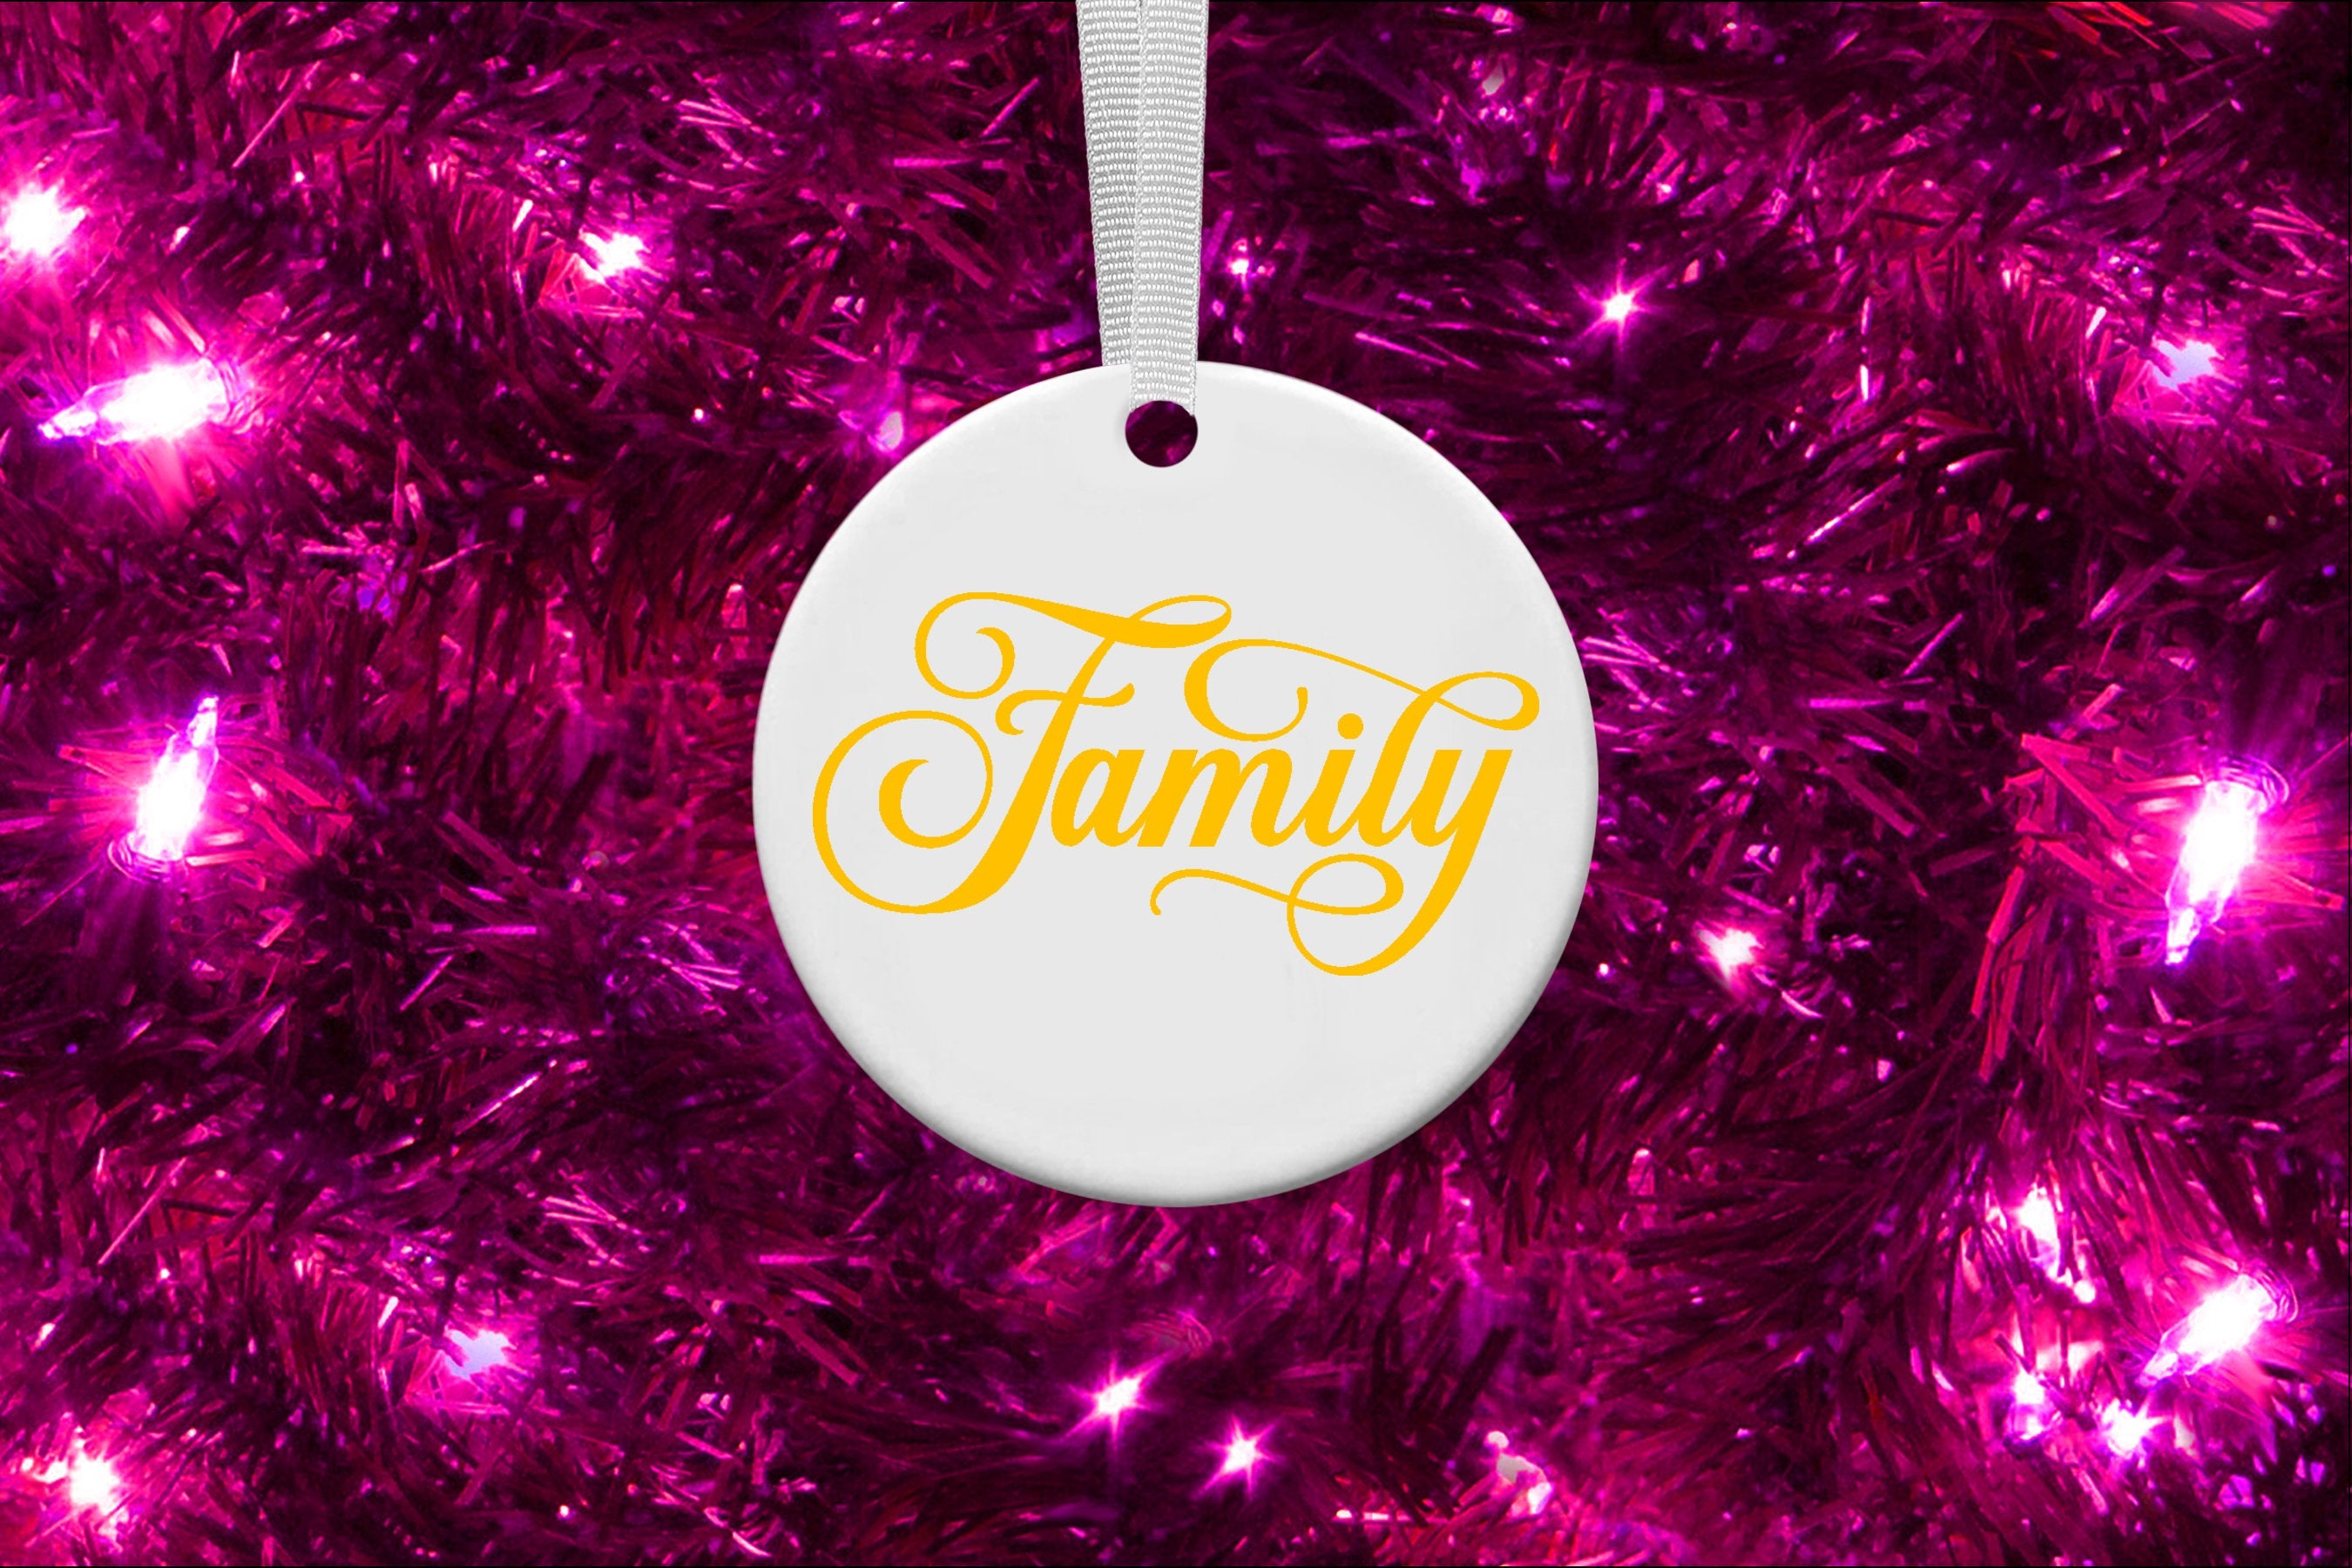 Family Round Ceramic Ornament for Christmas Holiday - 3 inches